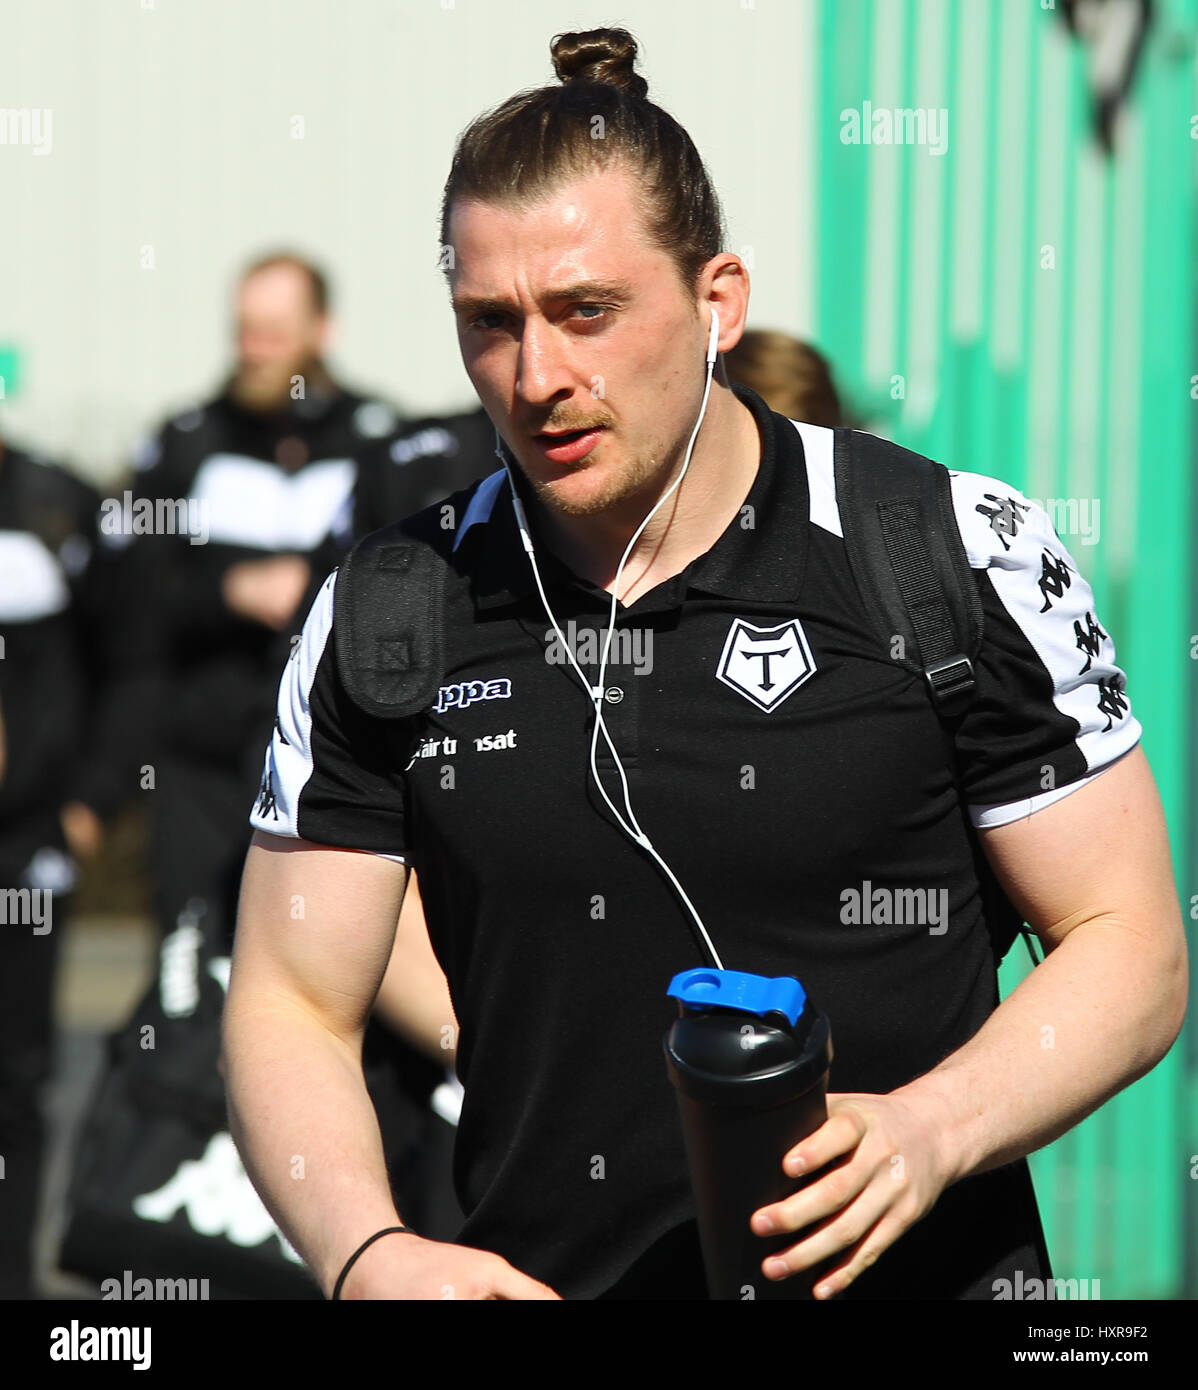 Andrew Dixon of Toronto Wolfpack Rugby League ahead of Keighley Cougars vs Toronto Wolfpack during the Kingstone Press League One clash at Cougar Park, Keighley , West Yorkshire,   Picture by Stephen Gaunt/Touchlinepics.com/Alamy Live News Stock Photo